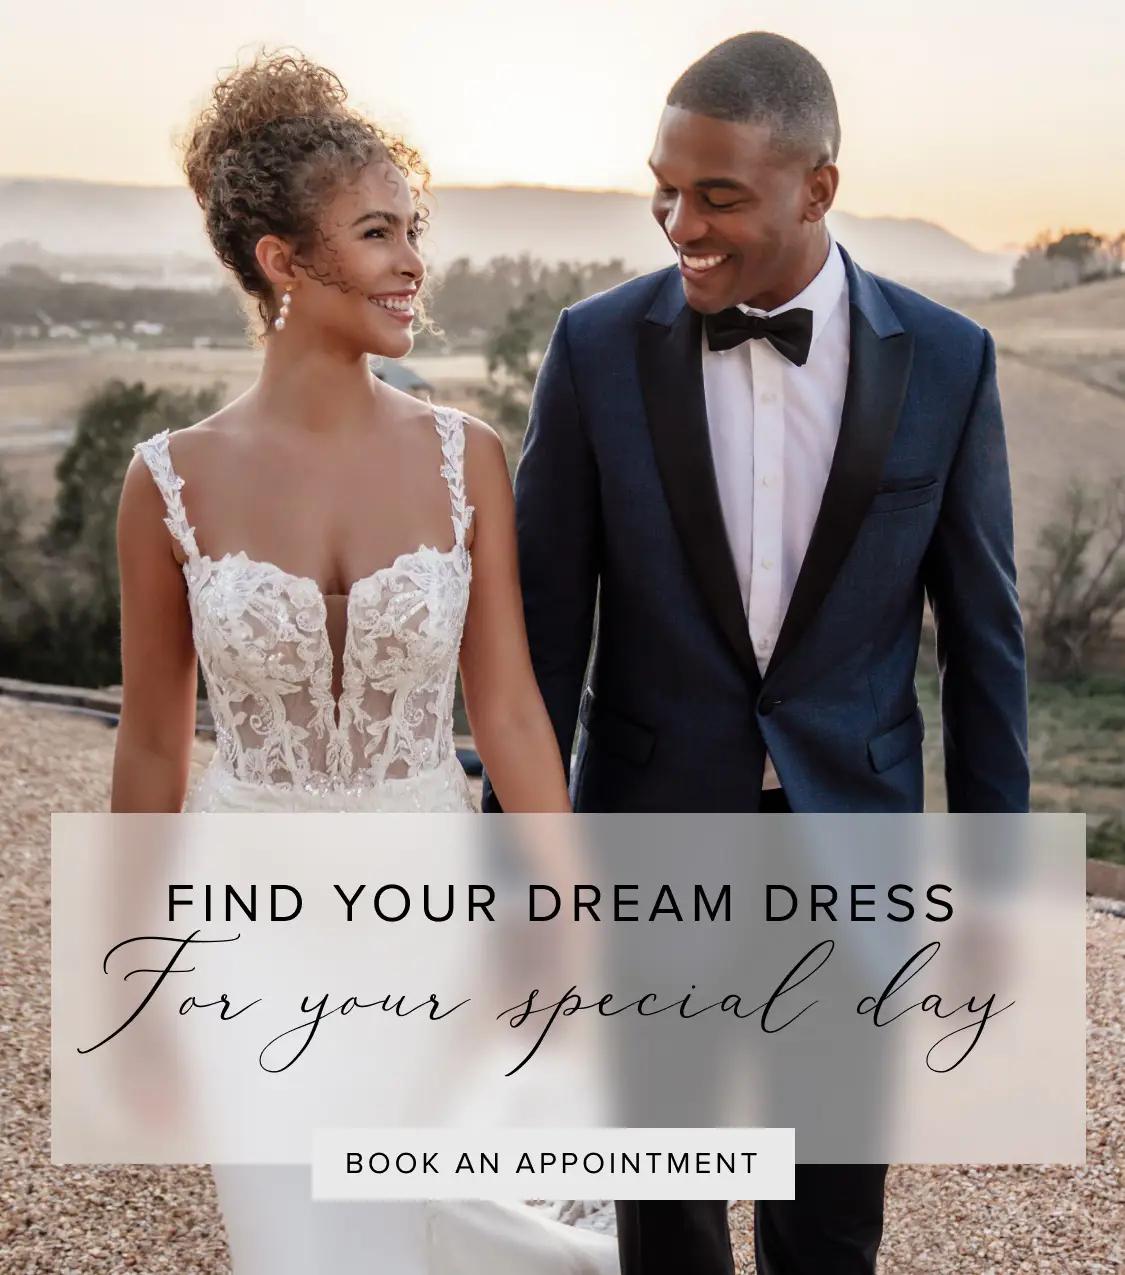 "Find your dream dress" banner for mobile